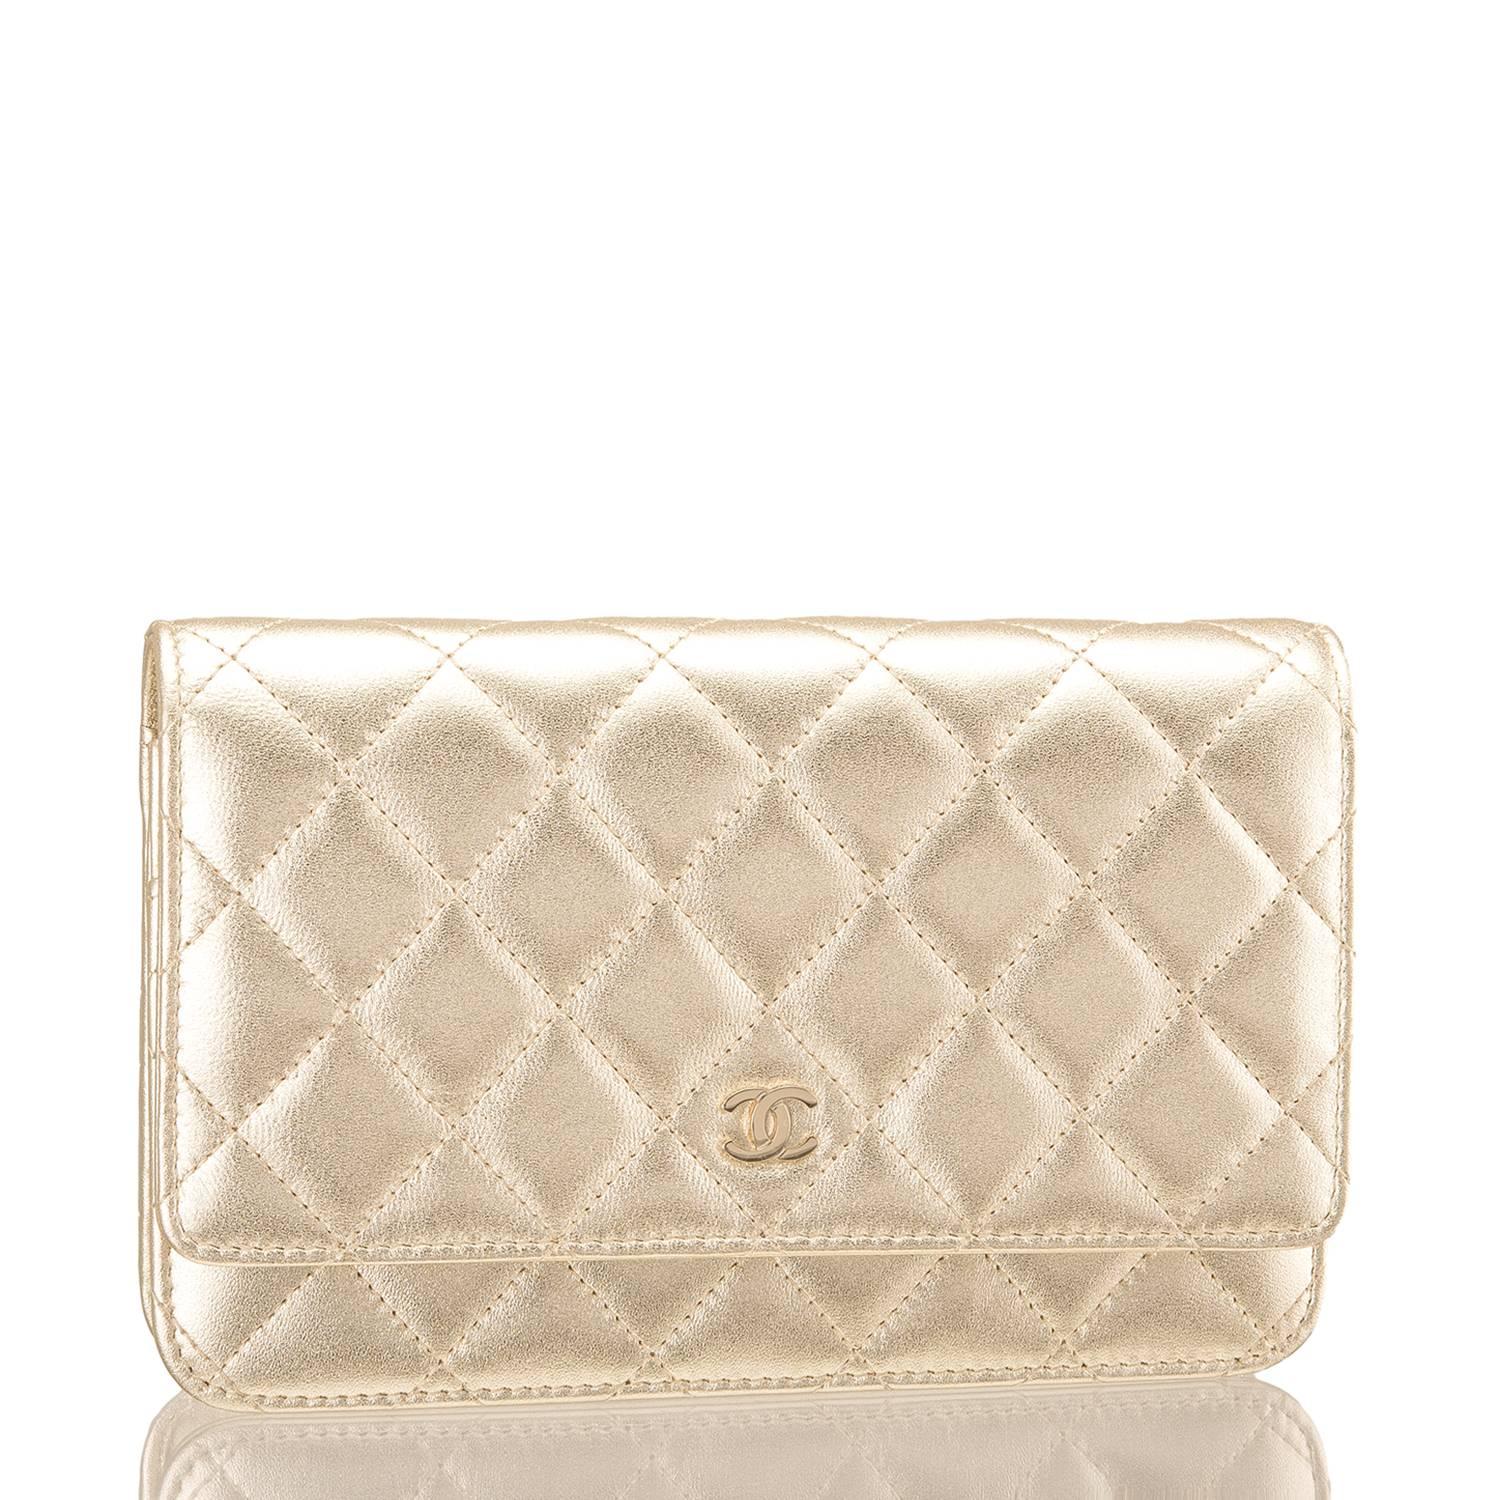 Chanel Classic Wallet on Chain (WOC) of gold lambskin leather with gold tone hardware. 

This Wallet On Chain features signature Chanel quilting, a front flap with CC charm and hidden snap closure, a half moon rear pocket and an interwoven gold